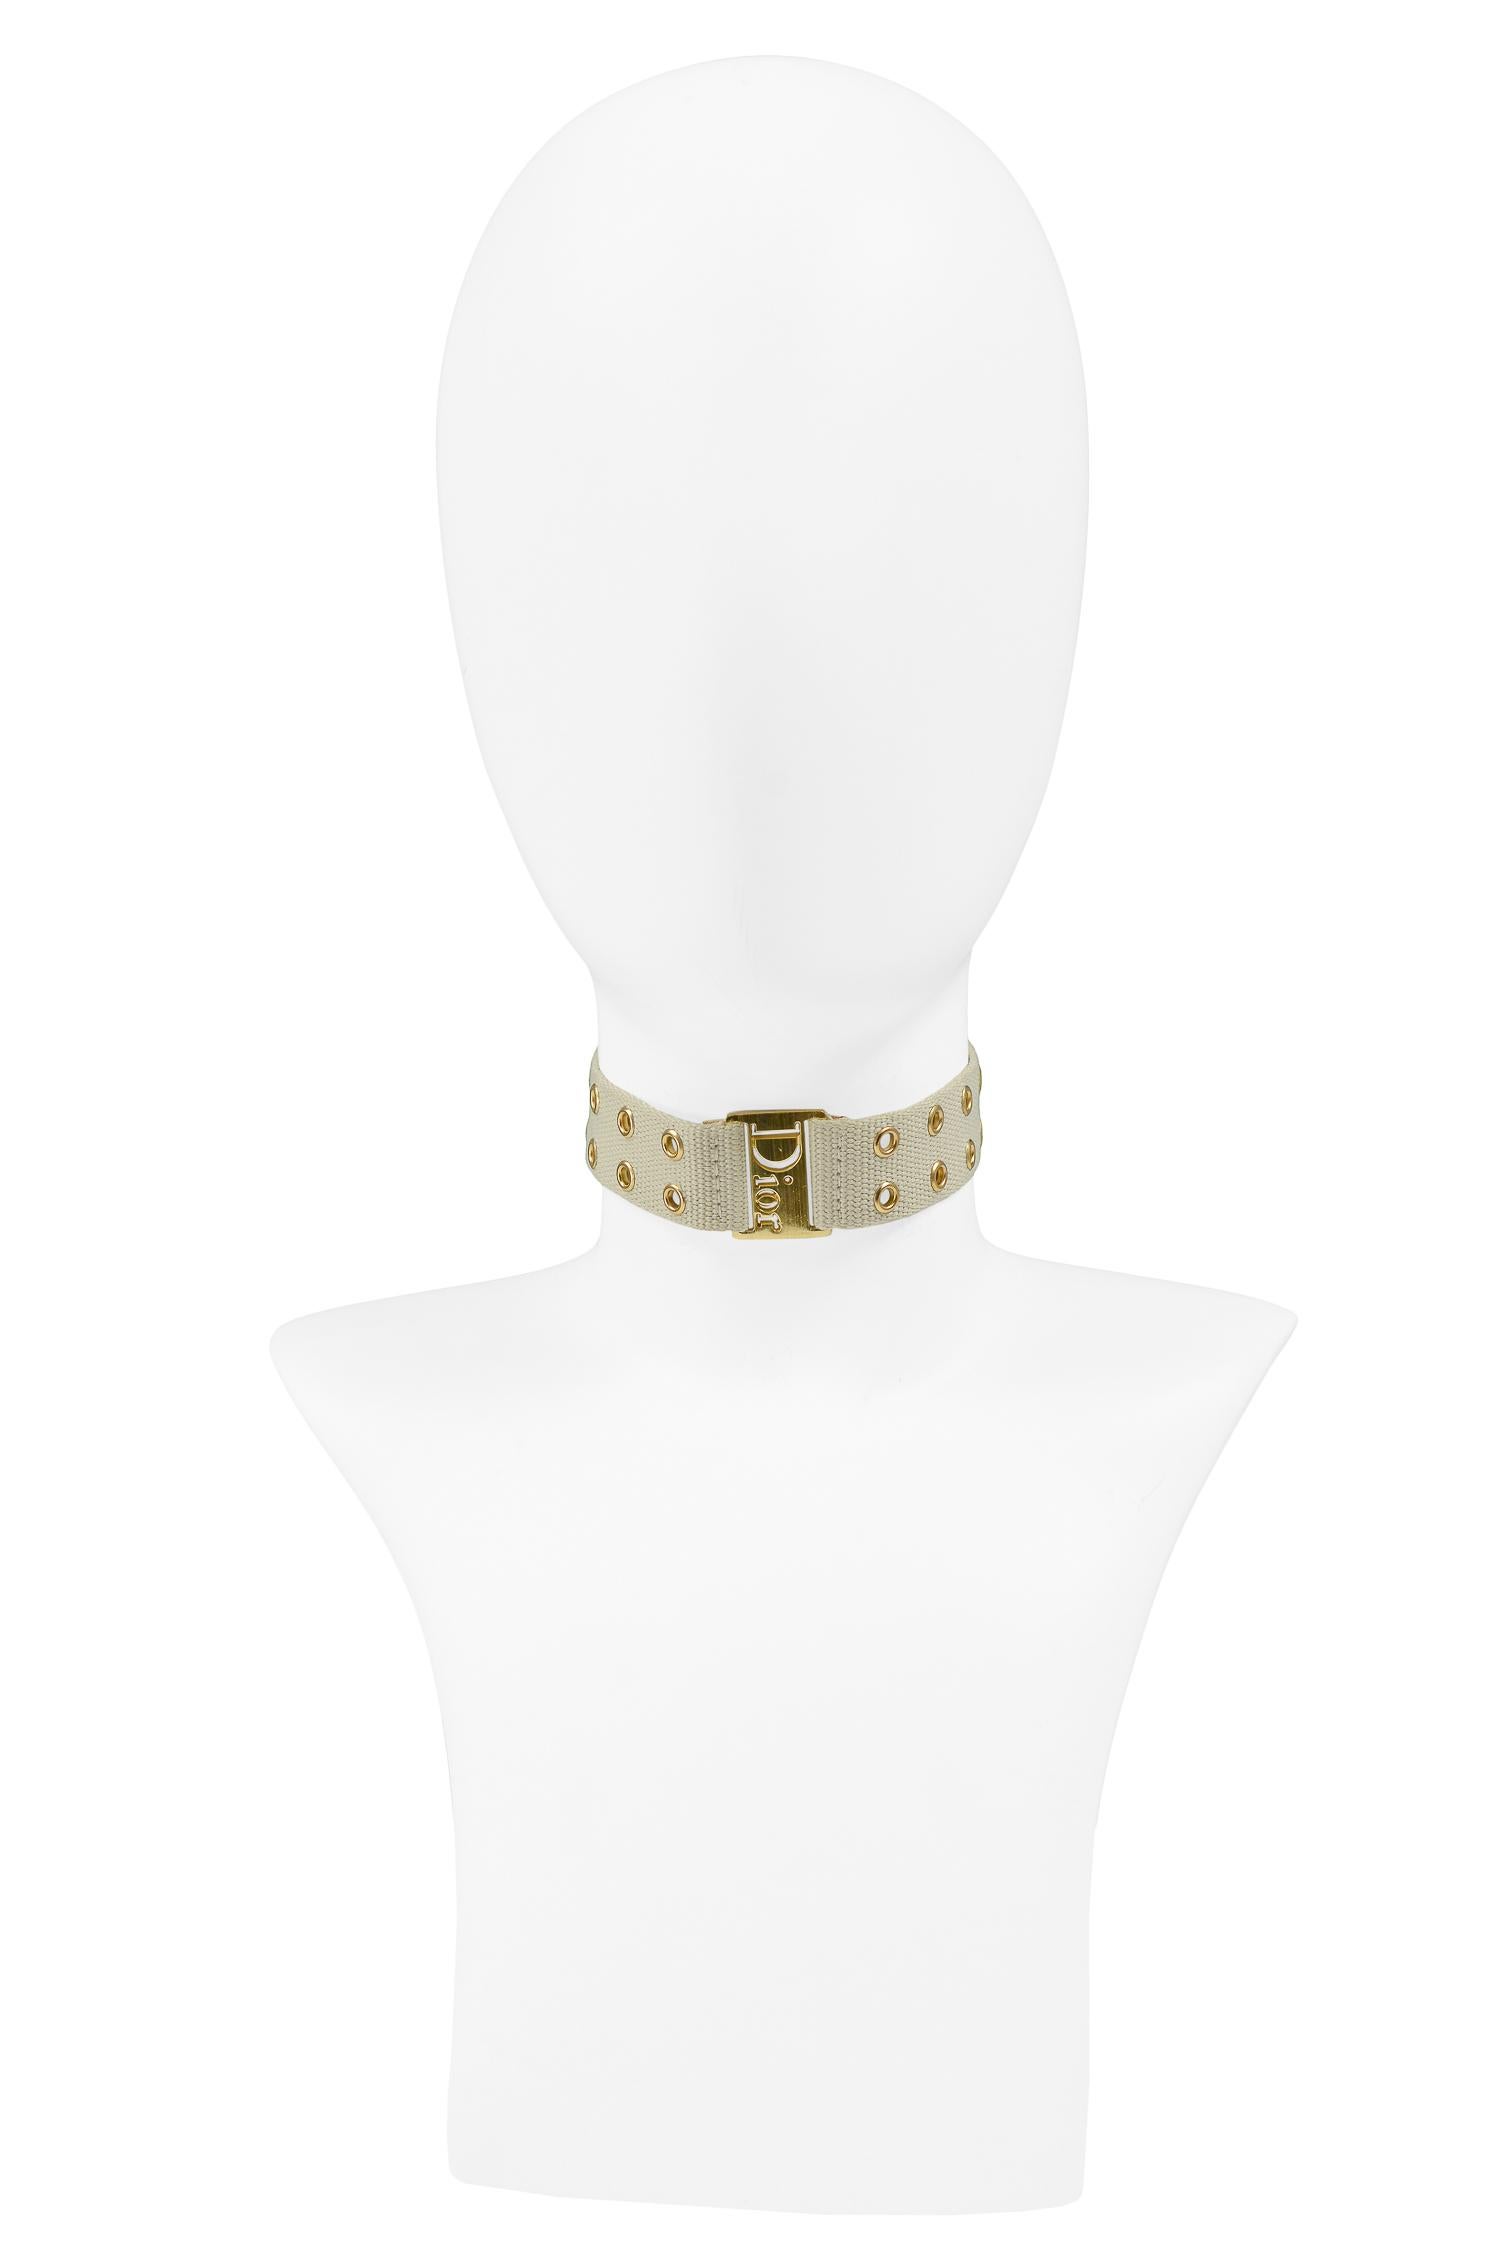 Resurrection is pleased to offer a vintage Christian Dior khaki choker featuring gold hardware, eyelets, and Dior embossed onto the front.

Christian Dior Paris
Designed by John Galliano
One Size
Excellent Vintage Condition
Authenticity Guaranteed 